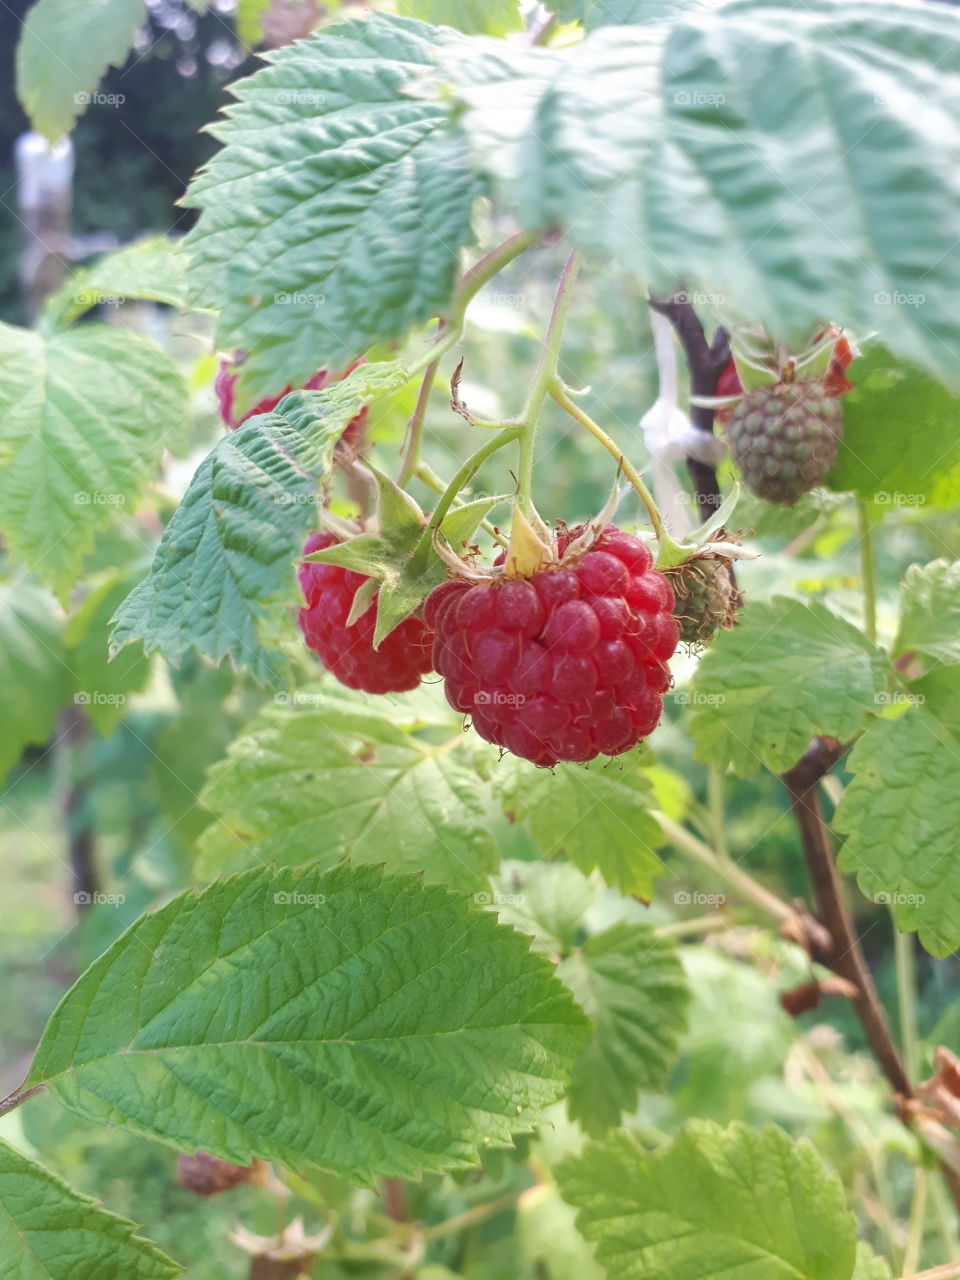 The moon is June. It is a picking of raspberry time. Full naturally grown raspberry.